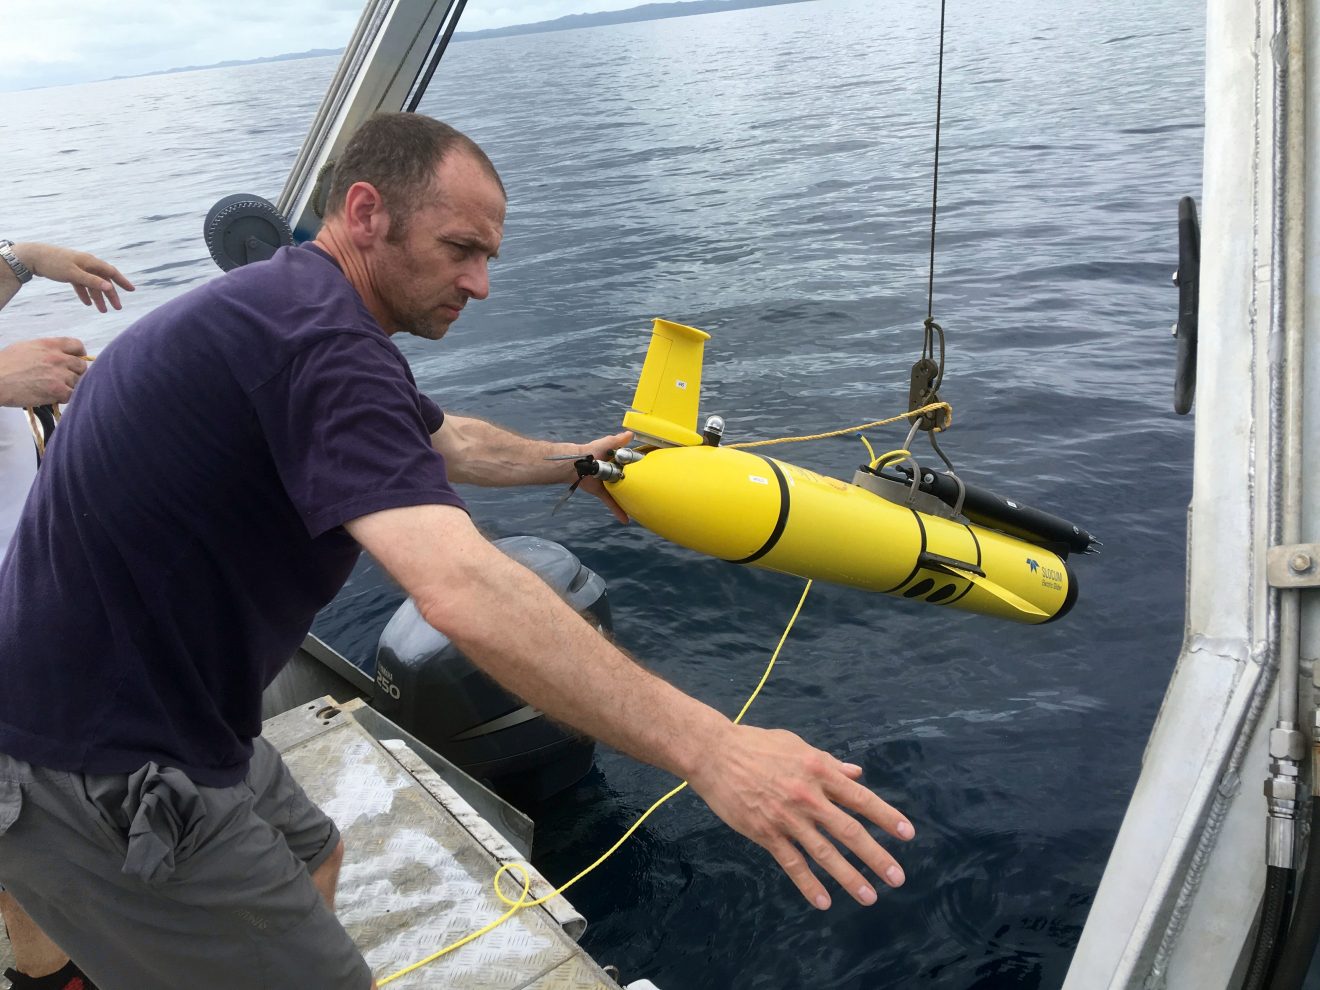 Photo courtesy of Louis St. LaurentHarper Simmons deploys a wave glider into the ocean off the coast of Palau.